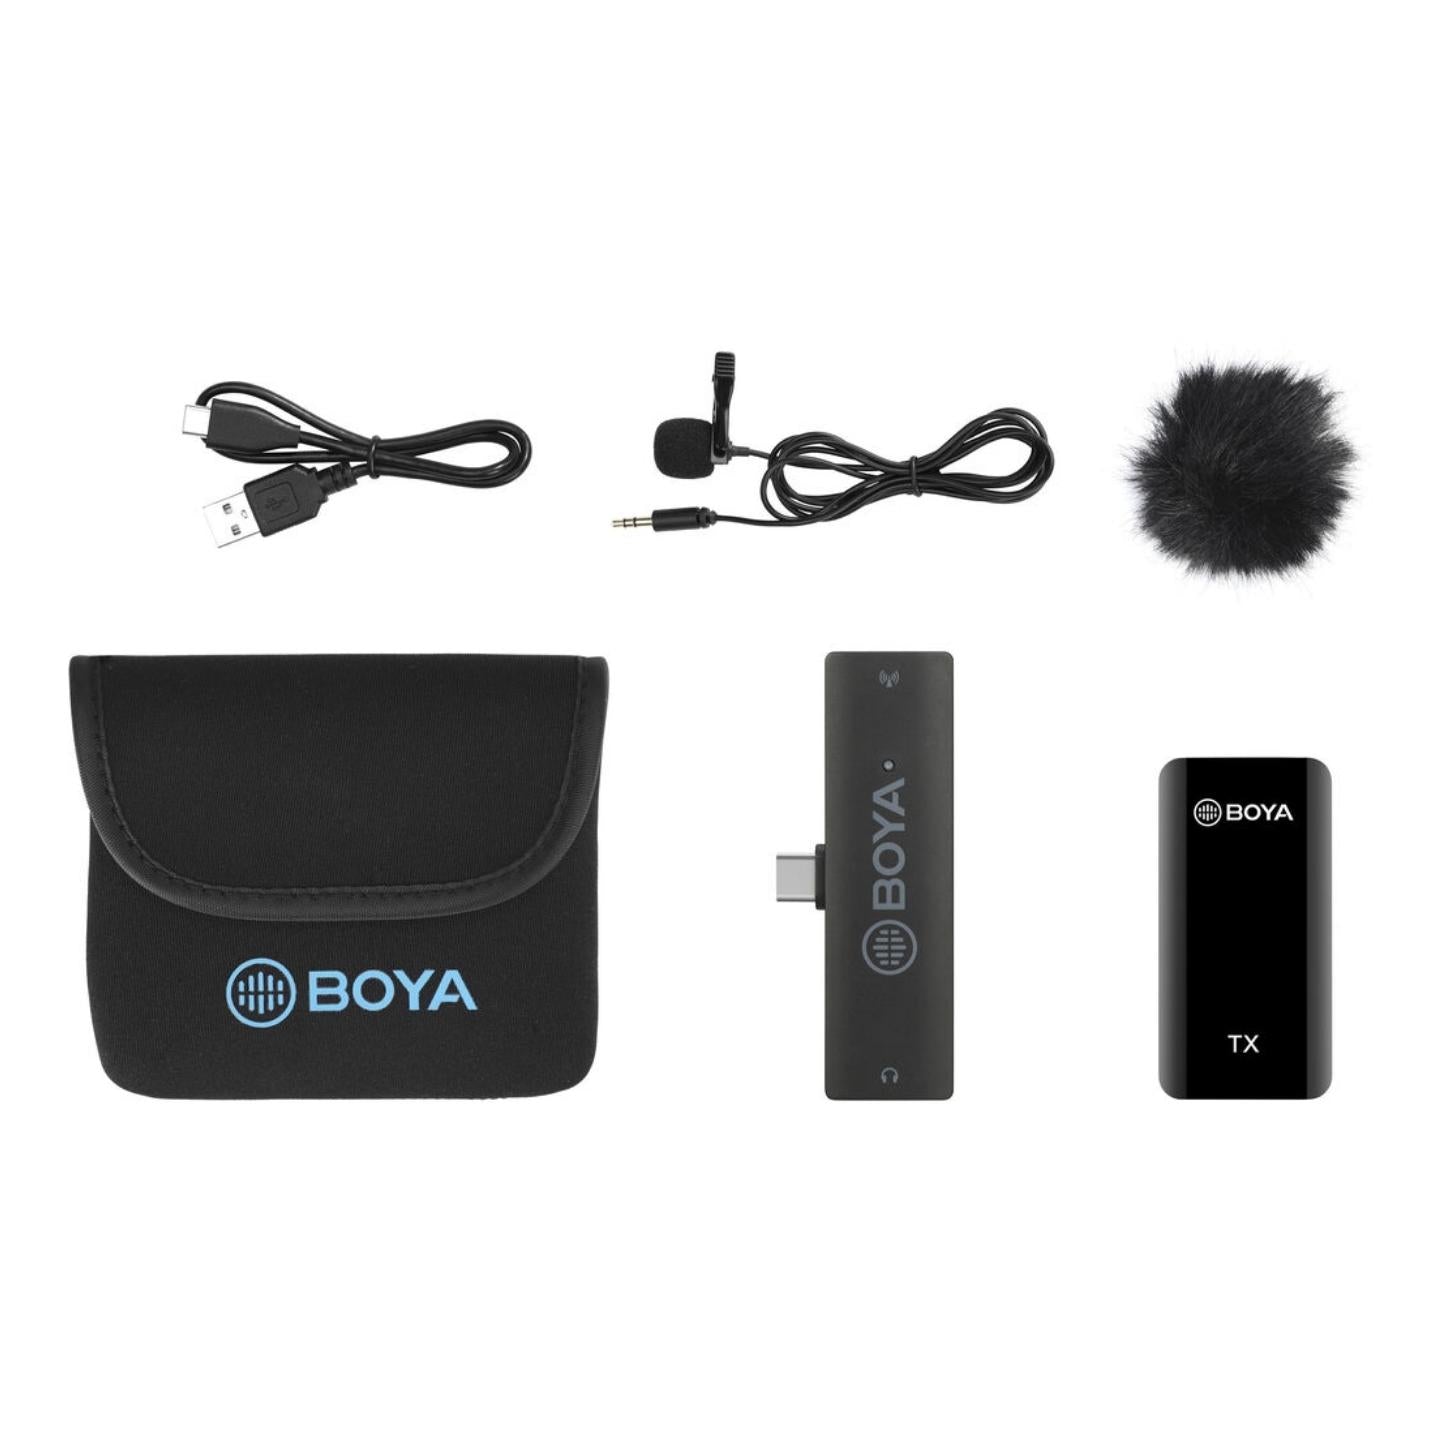 Boya BY-XM6 2.4GHz Dual-Channel Wireless Microphone System with USB Type-C, 100m Range Operation, RXD Receiver, 3.5mm TRS Jack for Smartphones, Tablet, PC | S5, S6